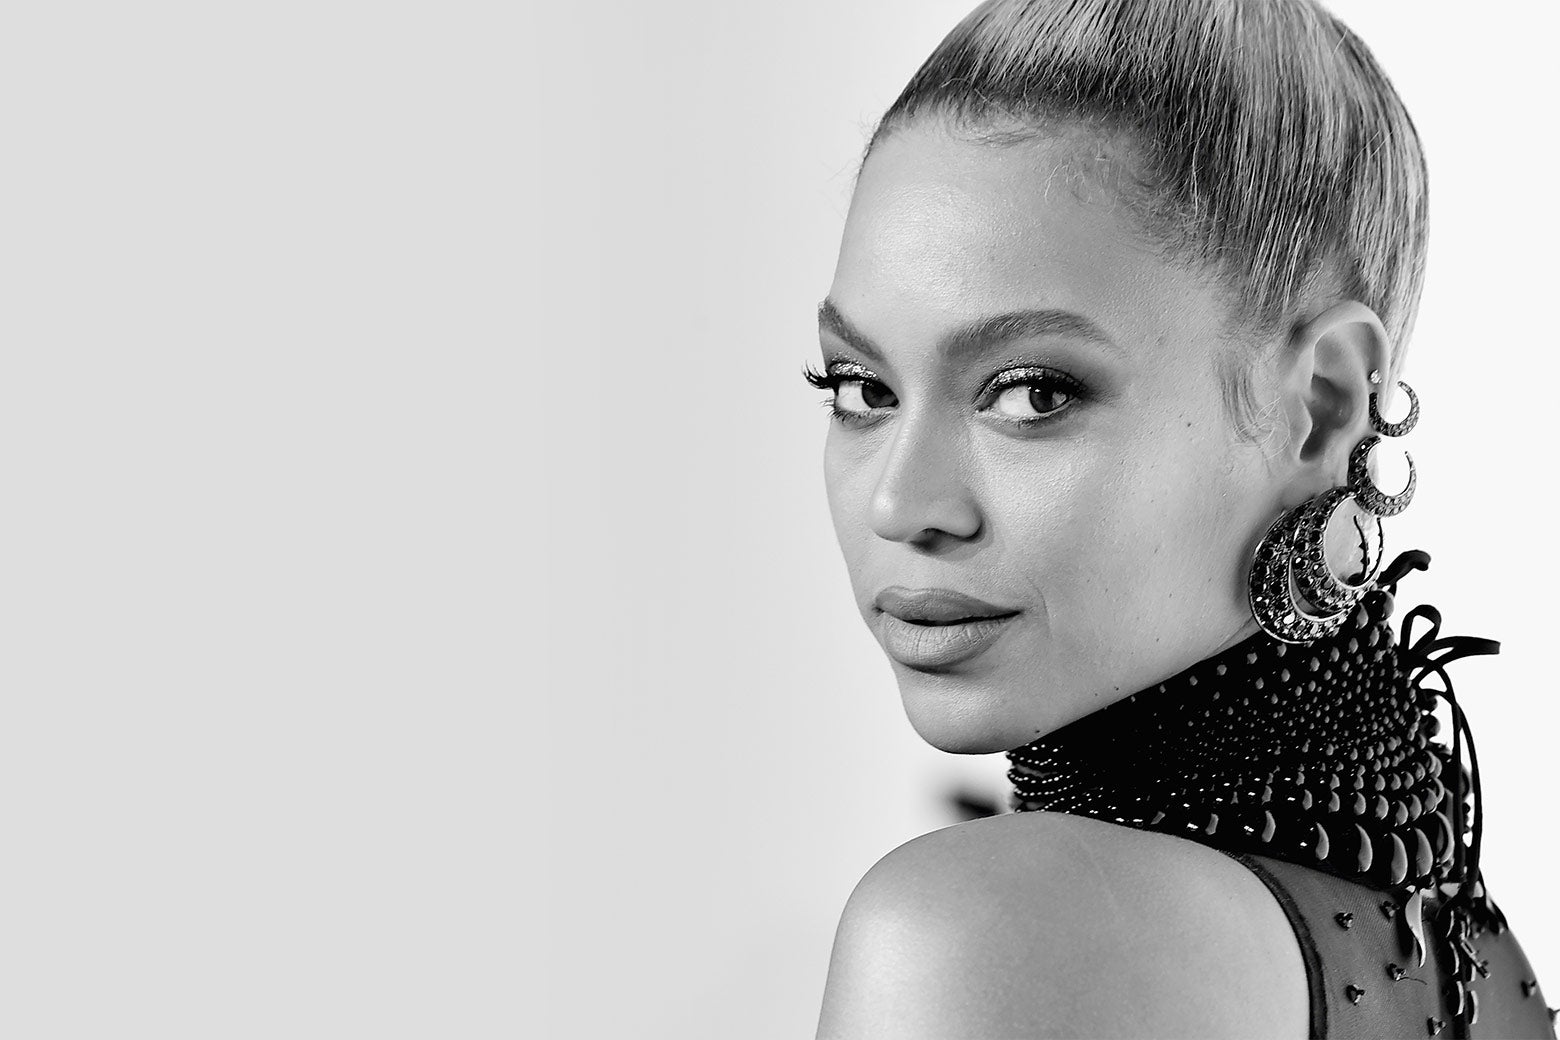 Beyone looks over her shoulder at the camera in a black-and-white photo.